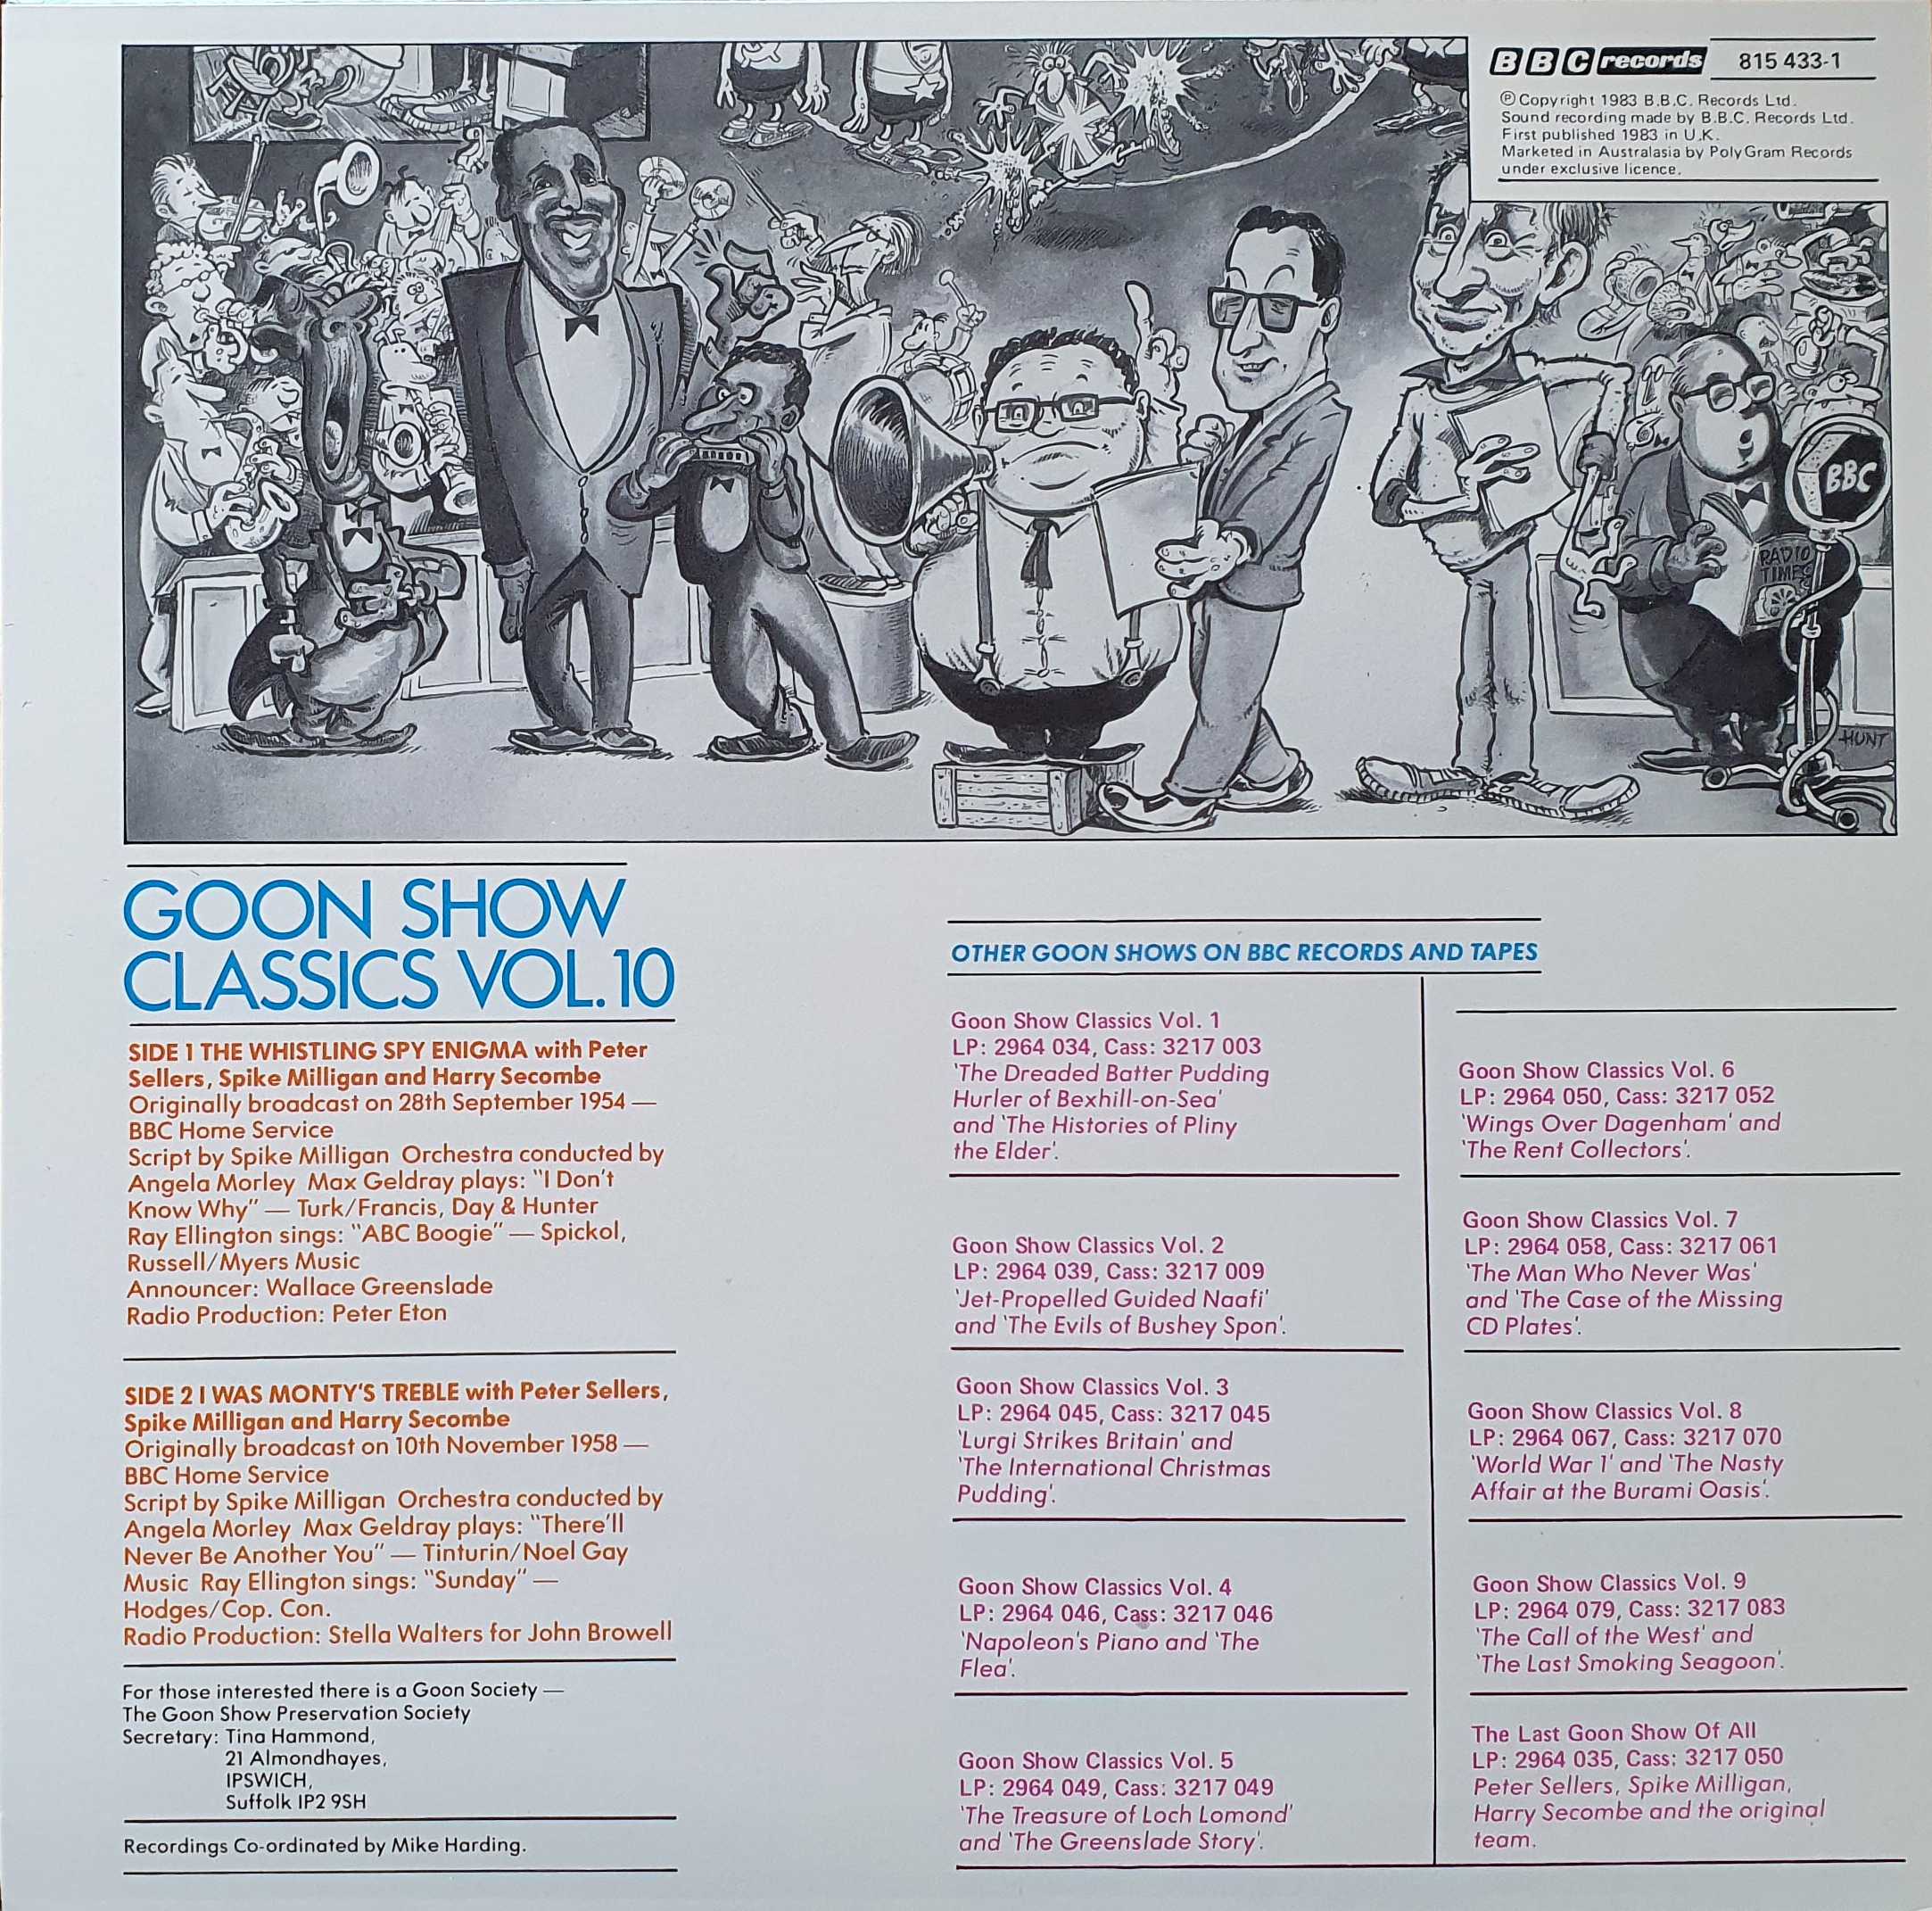 Picture of 815 433-1 Goon show classics - Volume 10 by artist Spike Milligan from the BBC records and Tapes library